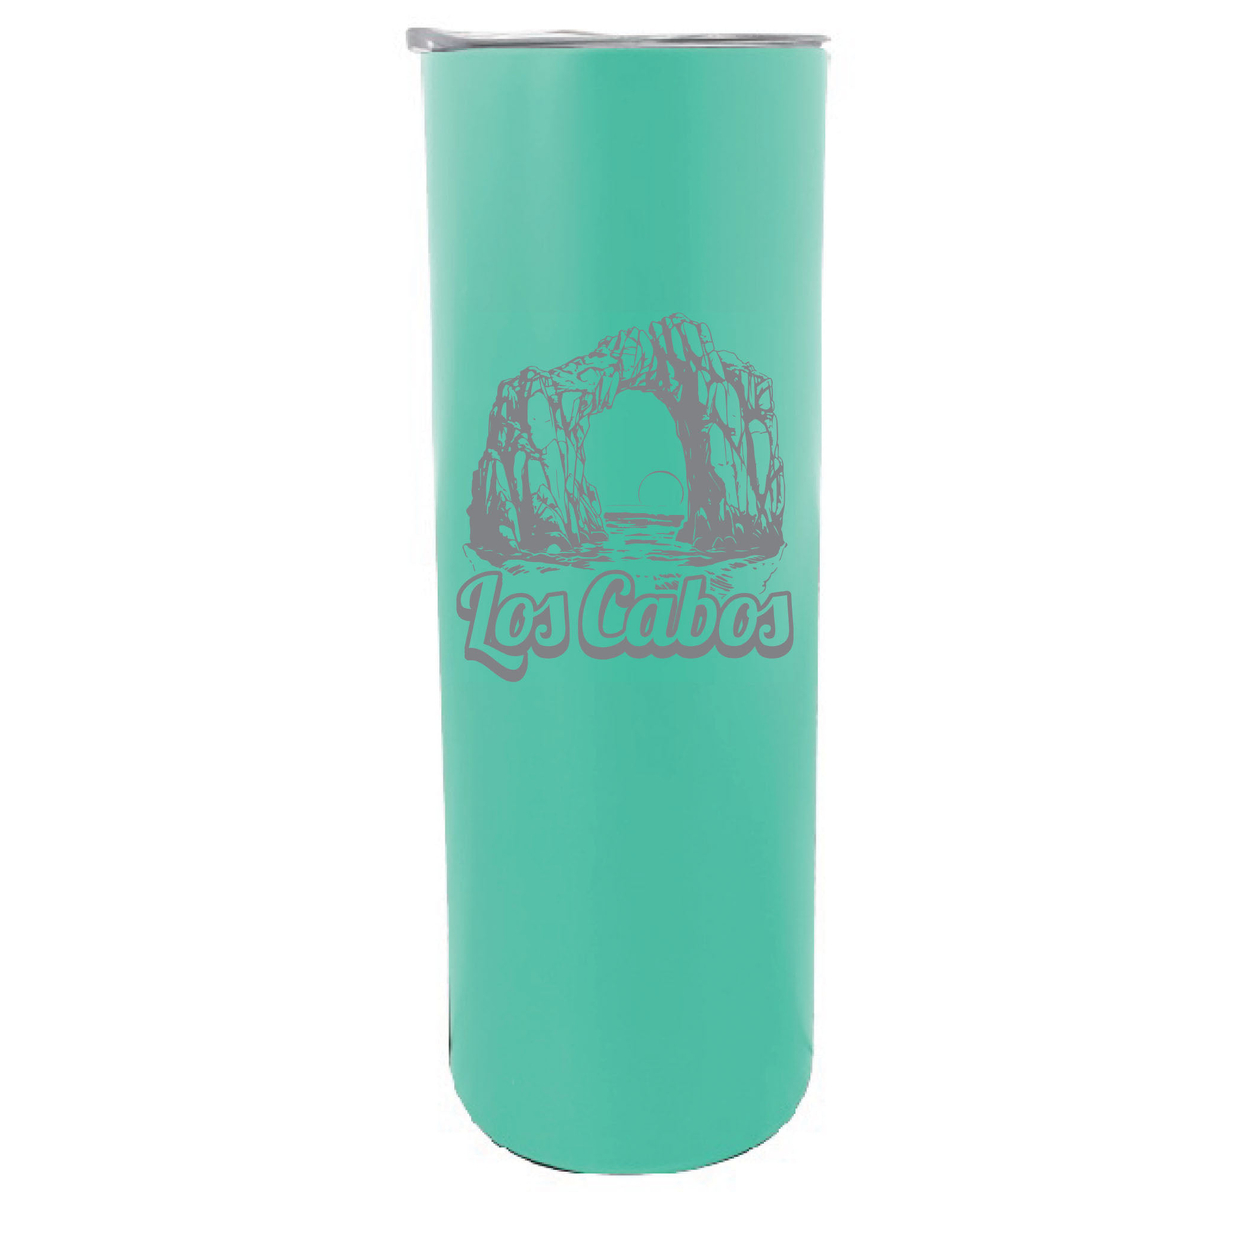 Los Cabos Mexico Souvenir 20 Oz Engraved Insulated Stainless Steel Skinny Tumbler - Gray Glitter,,2-Pack